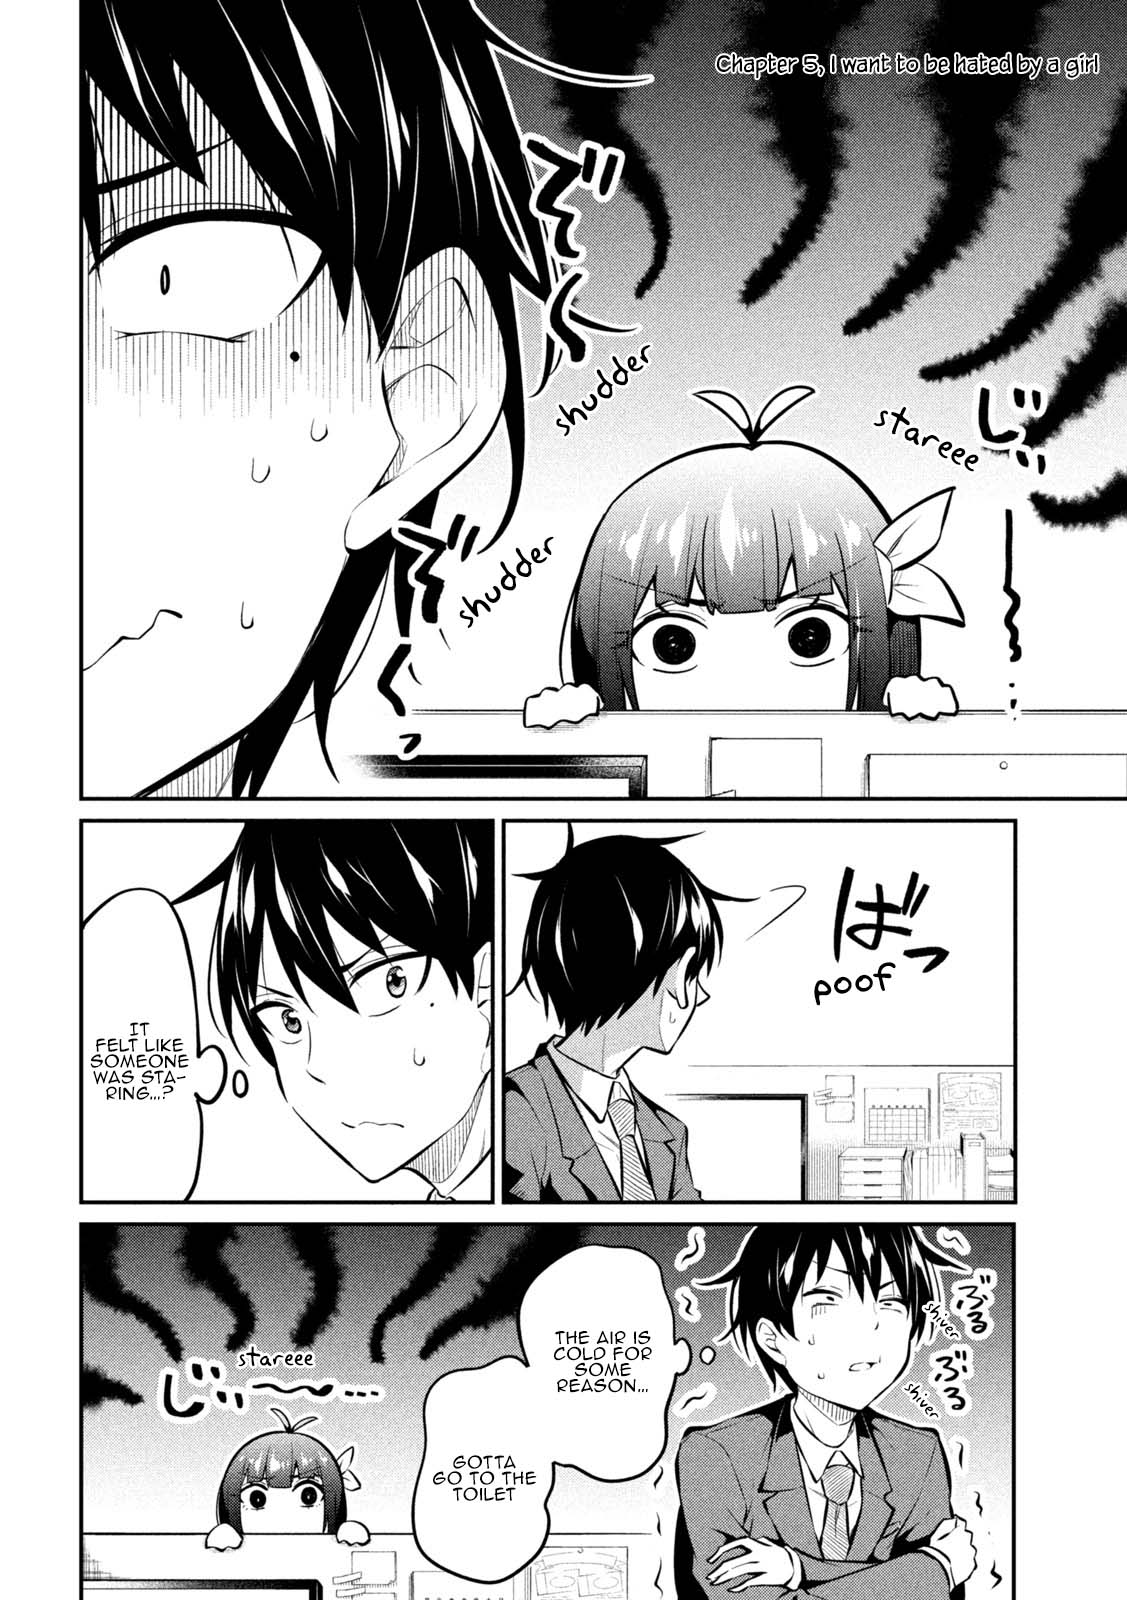 Home Cabaret ~Operation: Making A Cabaret Club At Home So Nii-Chan Can Get Used To Girls~ Chapter 5 #3